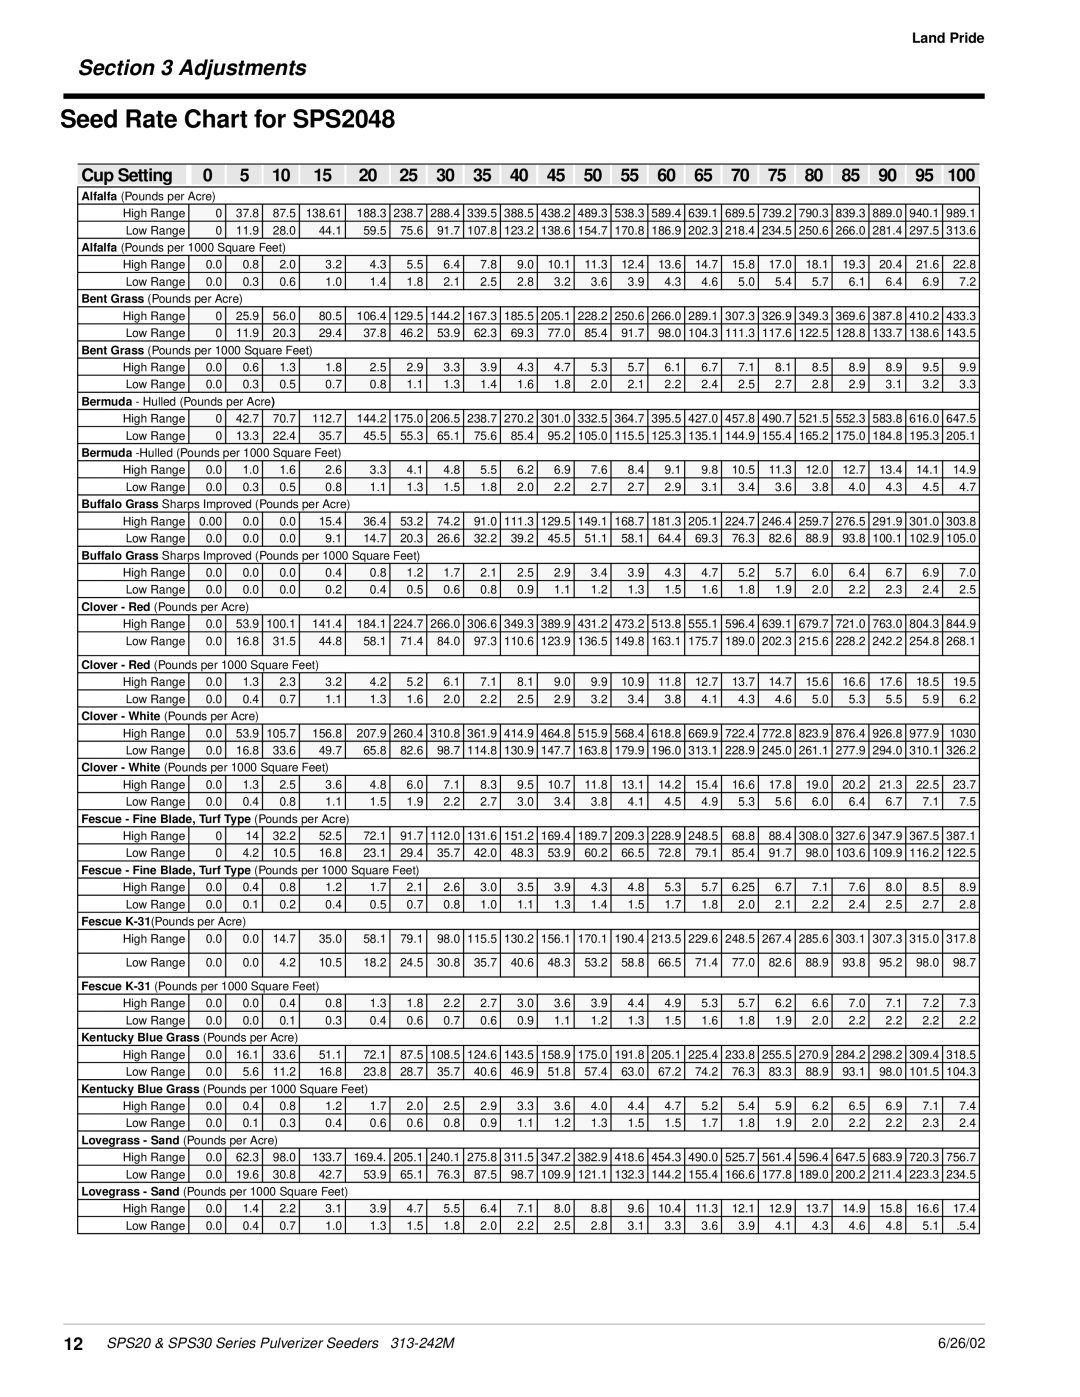 Land Pride Seed Rate Chart for SPS2048, Cup Setting, Adjustments, Land Pride, 6/26/02, Lovegrass - Sand Pounds per Acre 